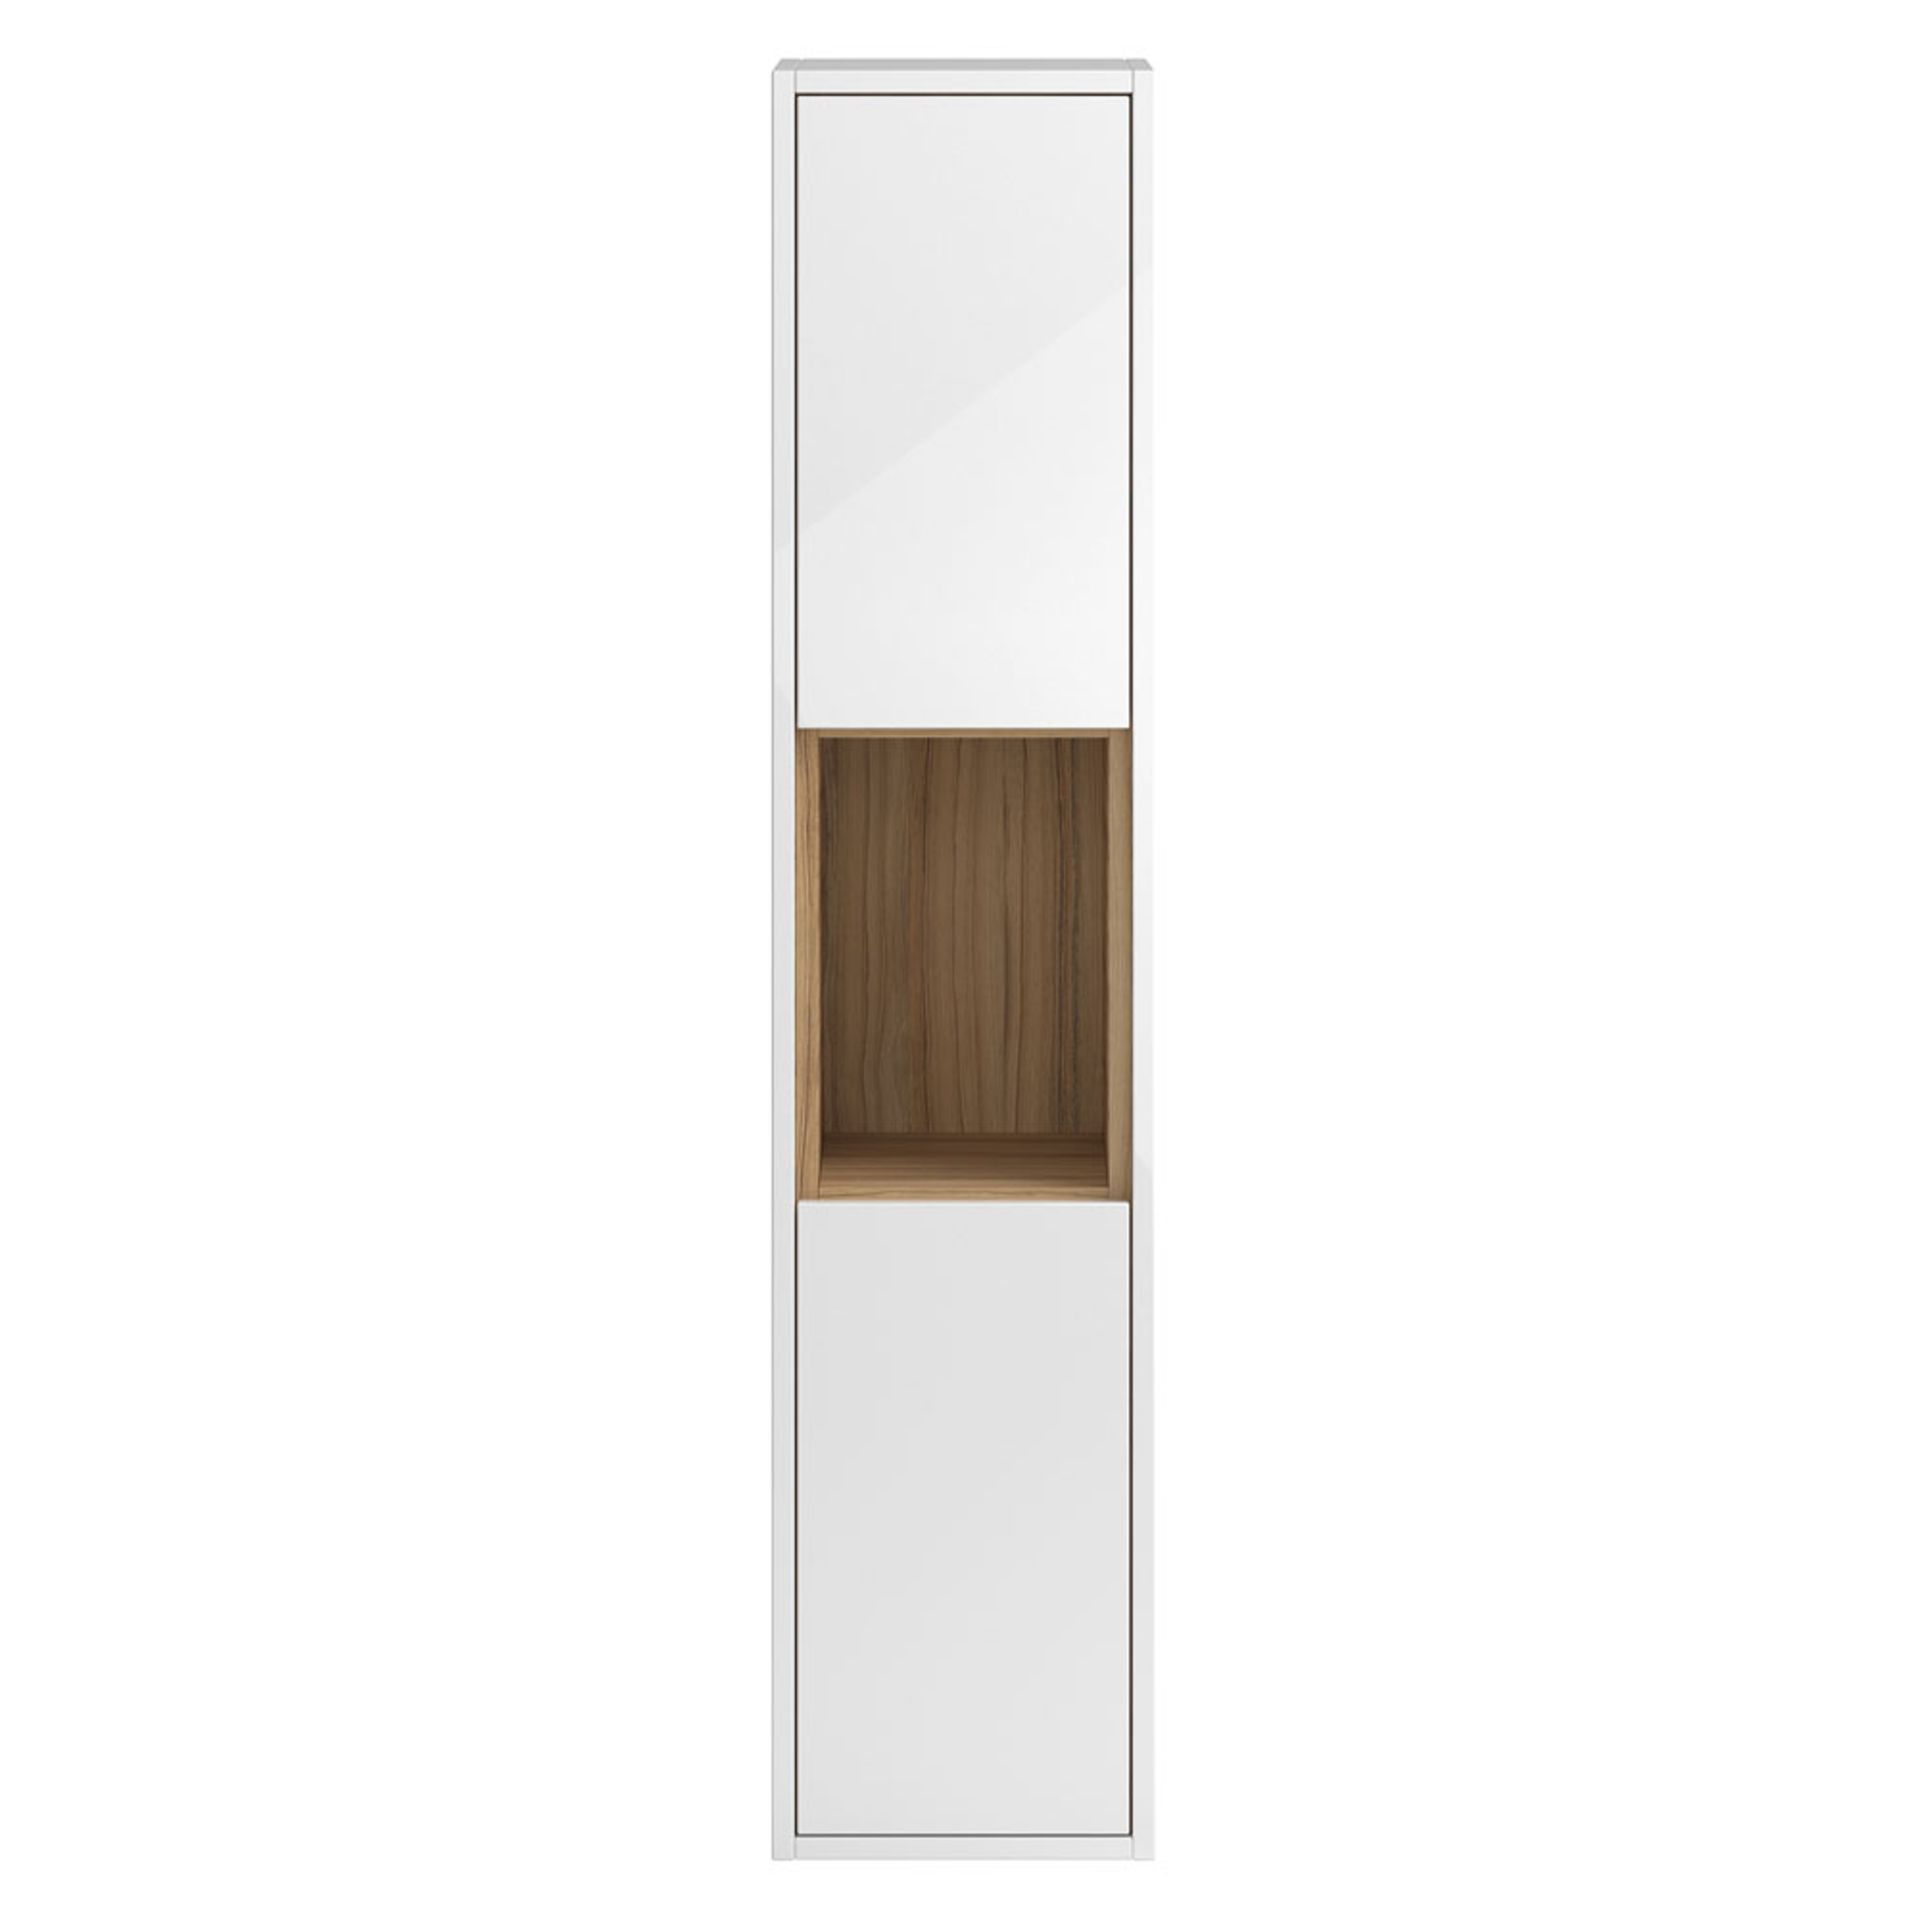 (LP116) 350mm Hudson Reed Coast White Gloss Tall Unit. RRP £369.95. The white gloss and coco bolo